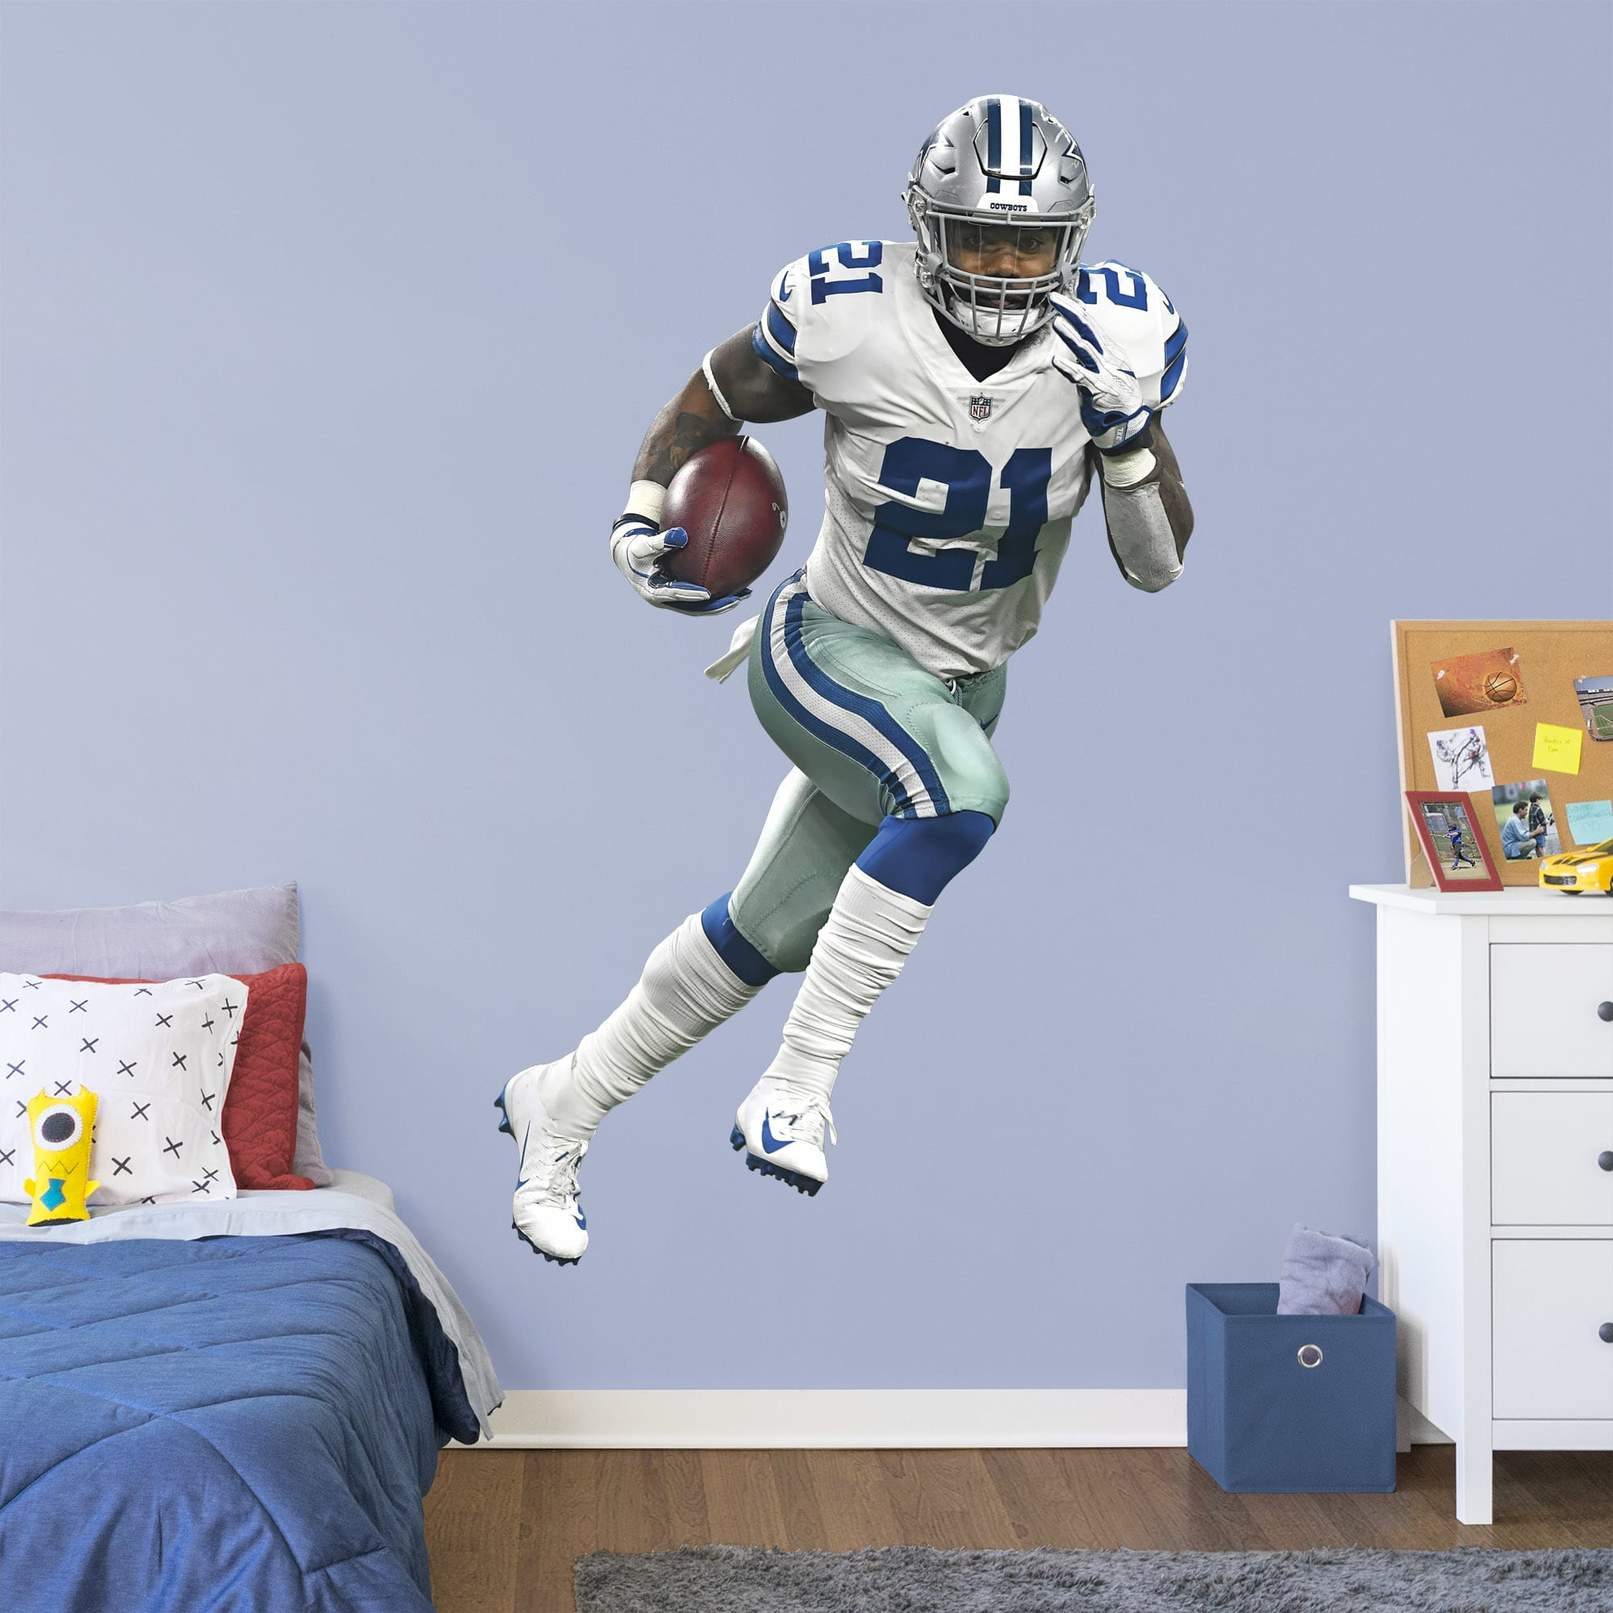 https://fathead.com/products/m1900-00026?_pos=4&_sid=34391af84&_ss=r&variant=32963356131416